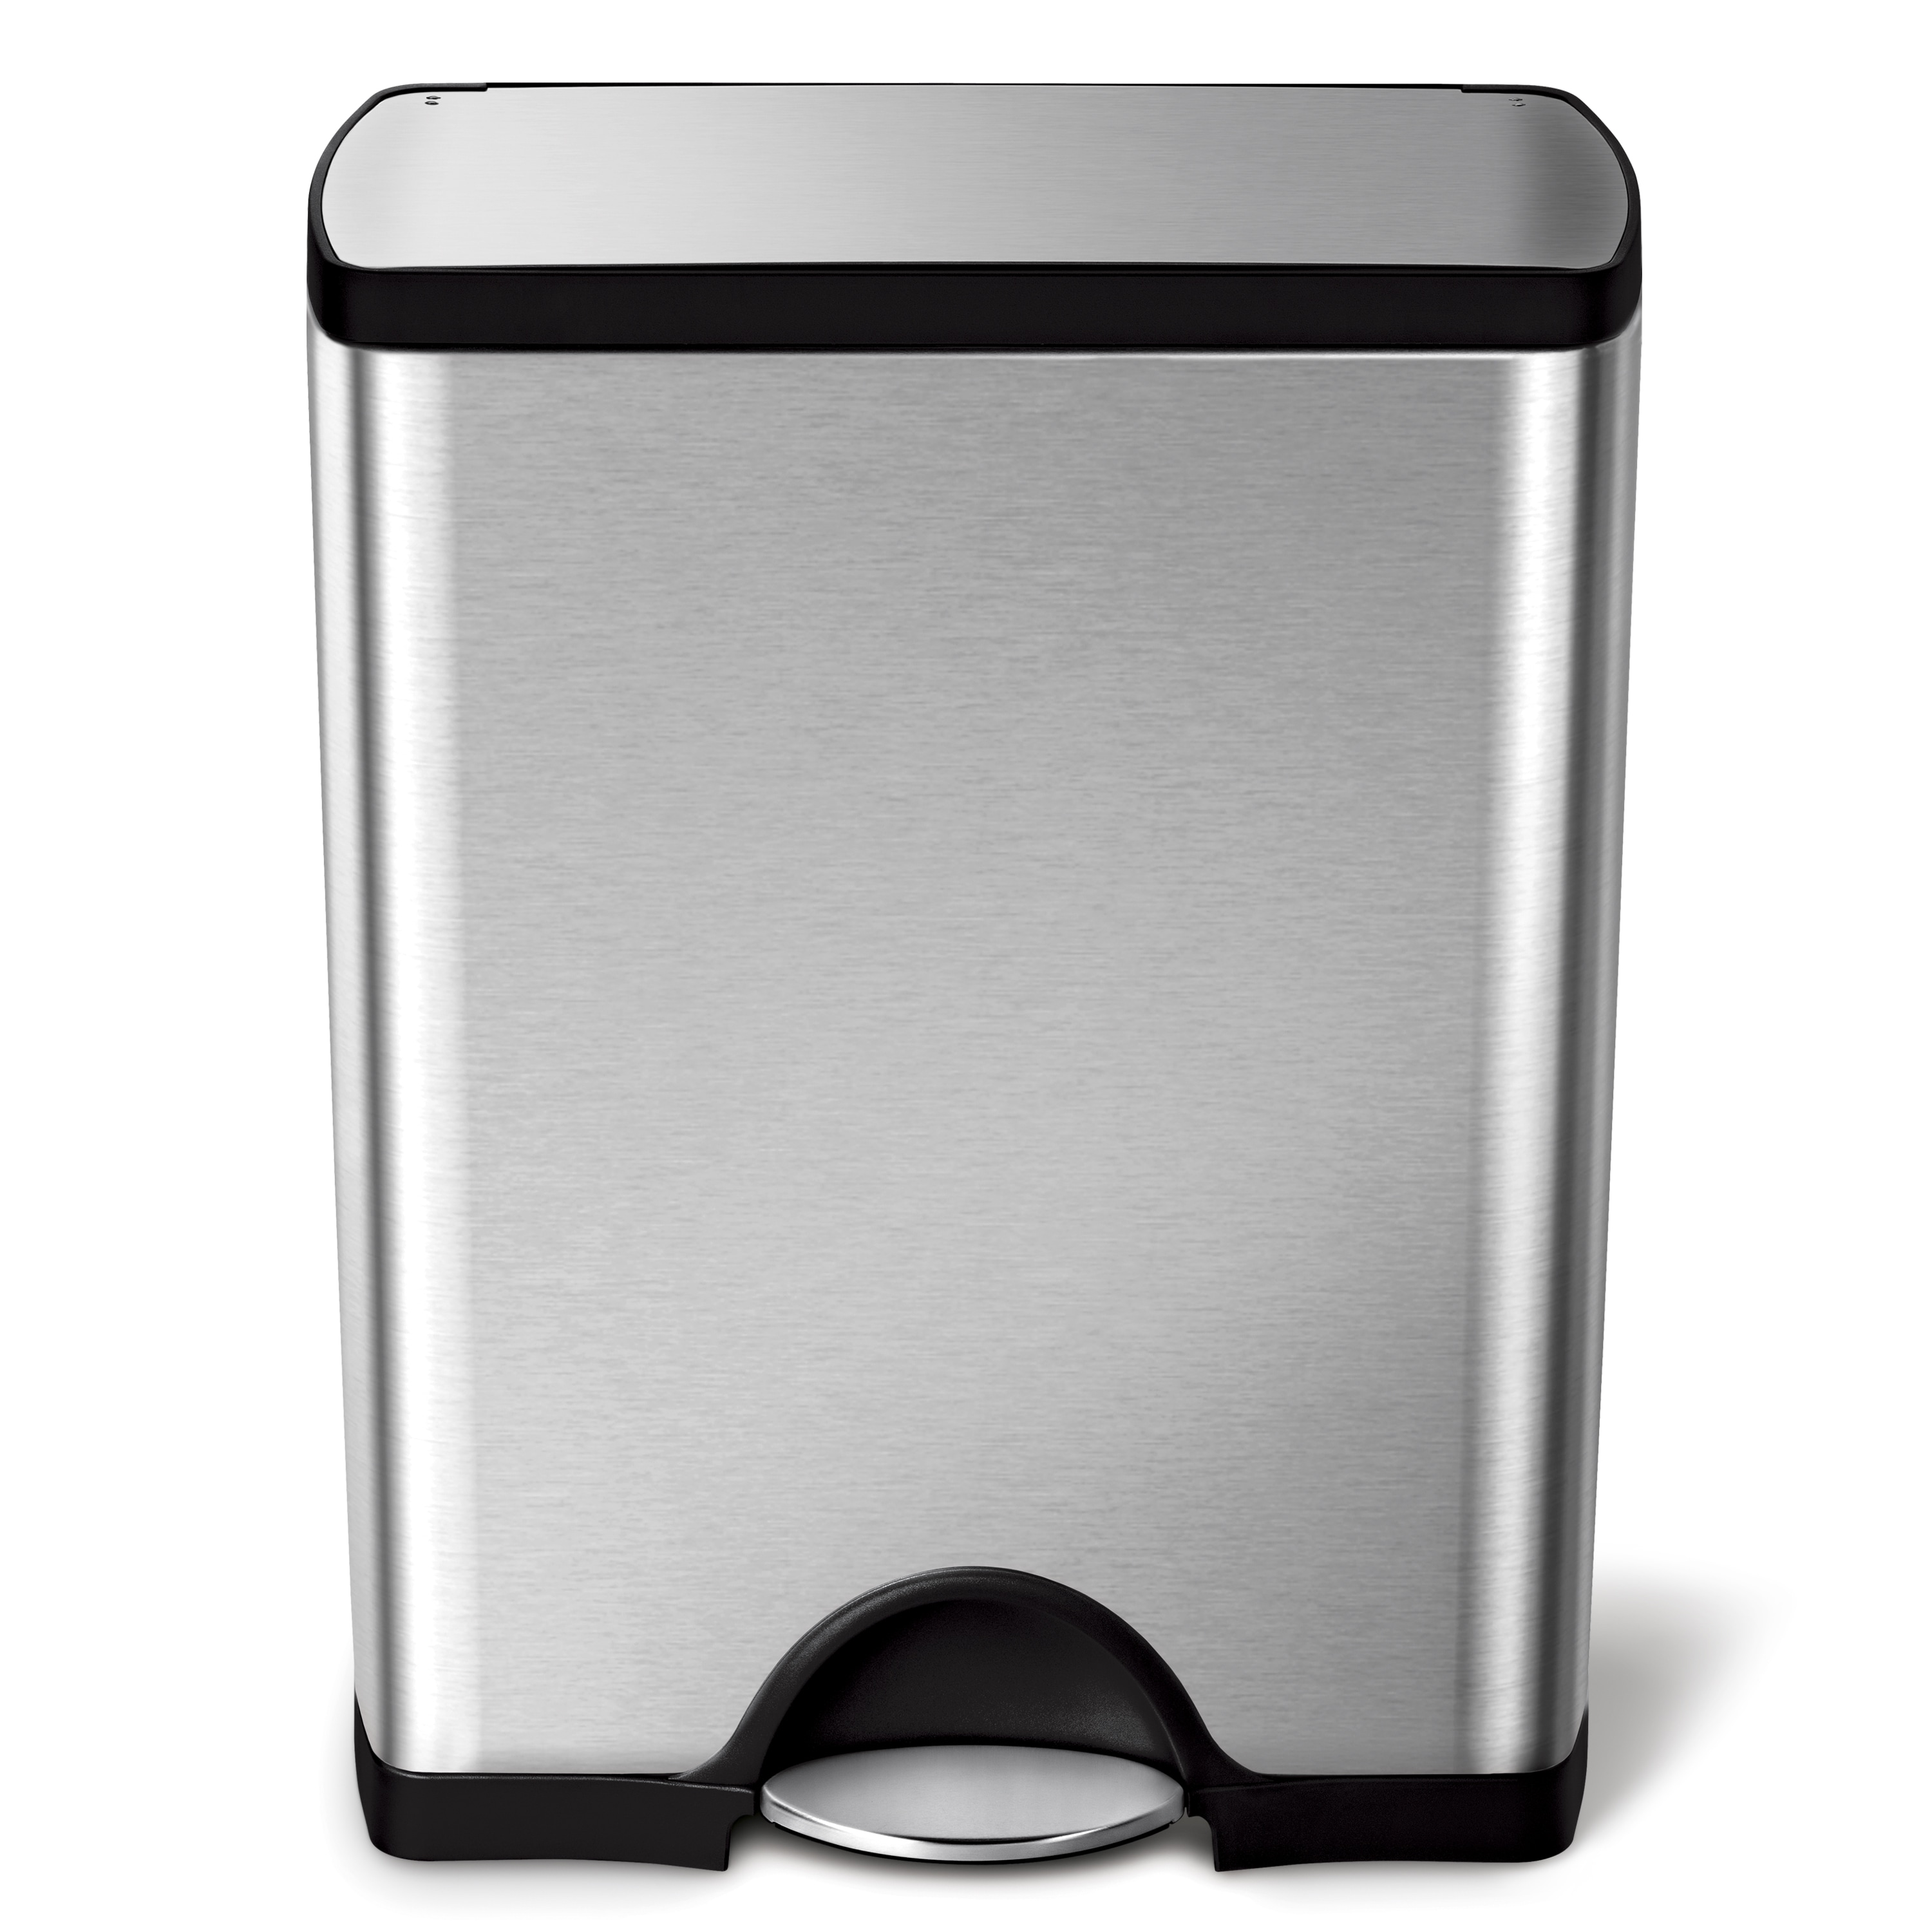 Daily Boutik Black 13-Gallon Kitchen Trash Can with Foot Pedal